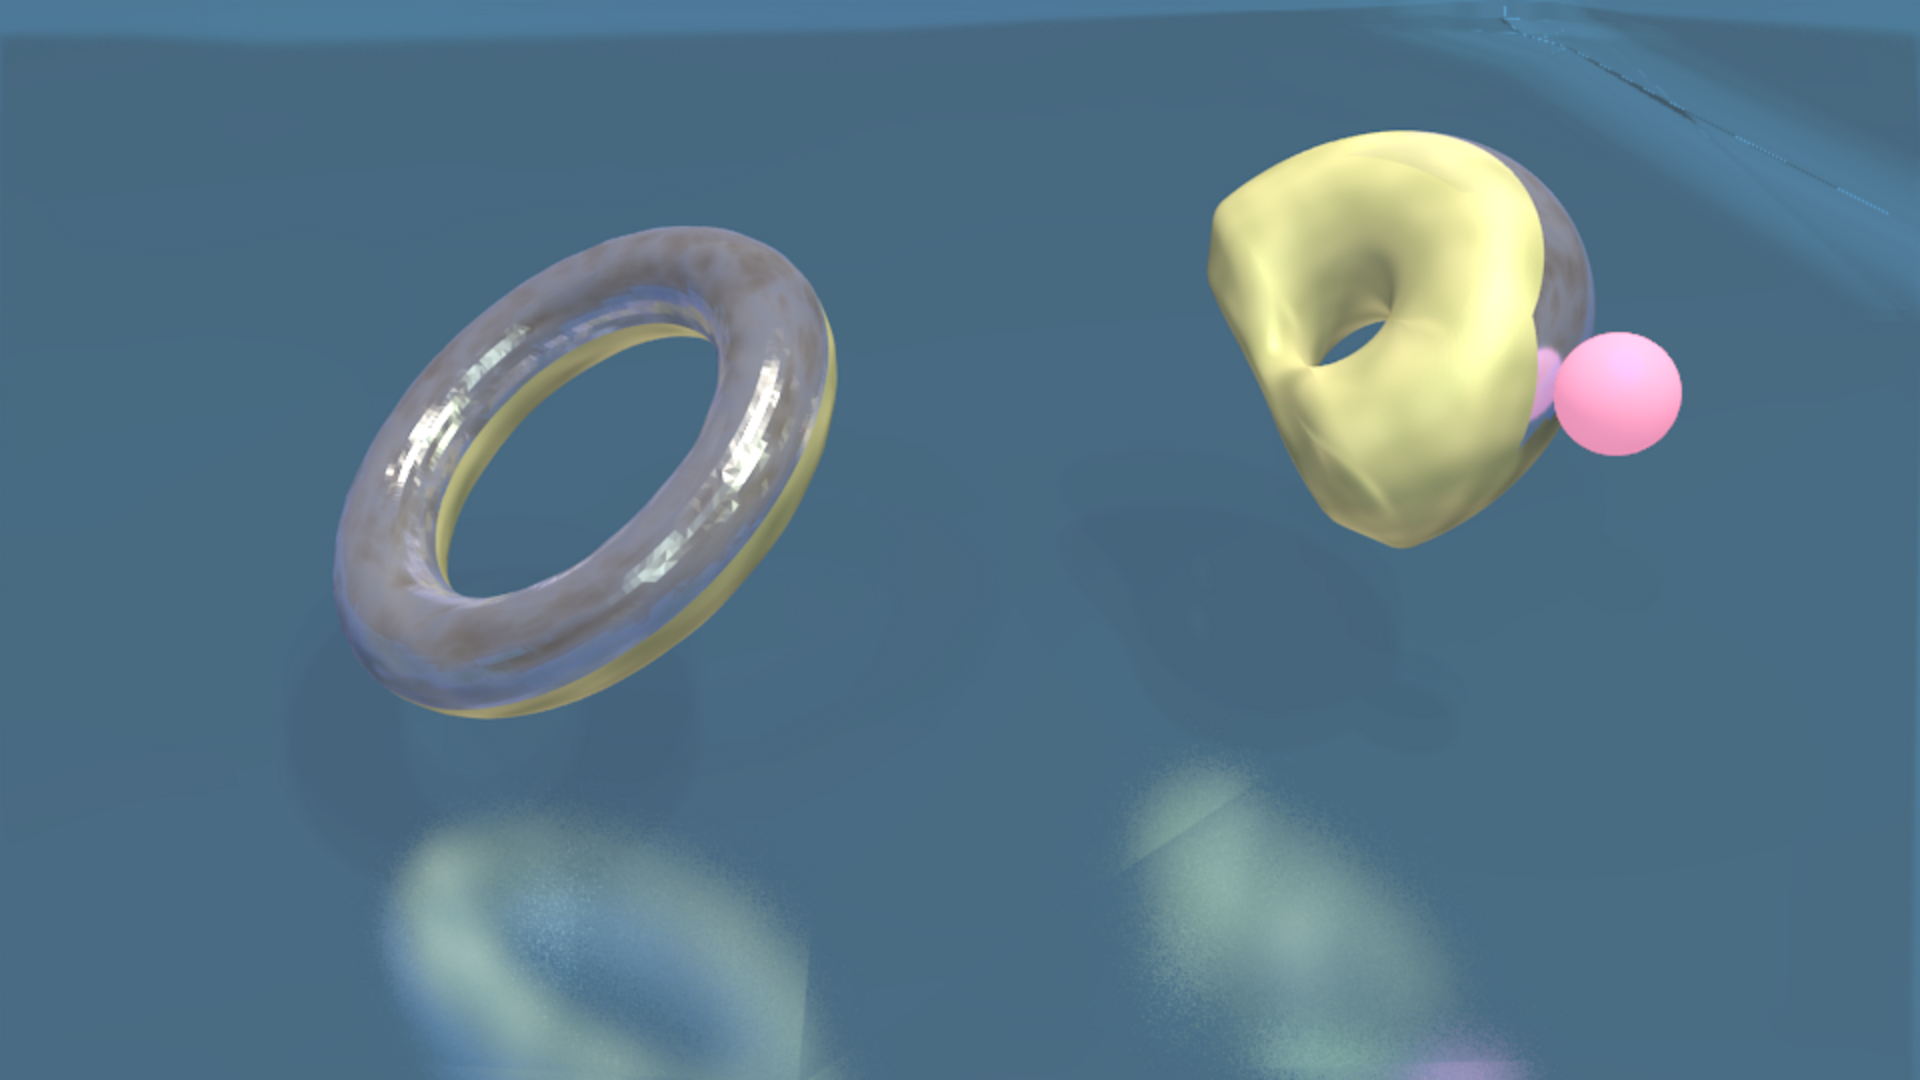 Rendering of two functionalized microswimmer designs.